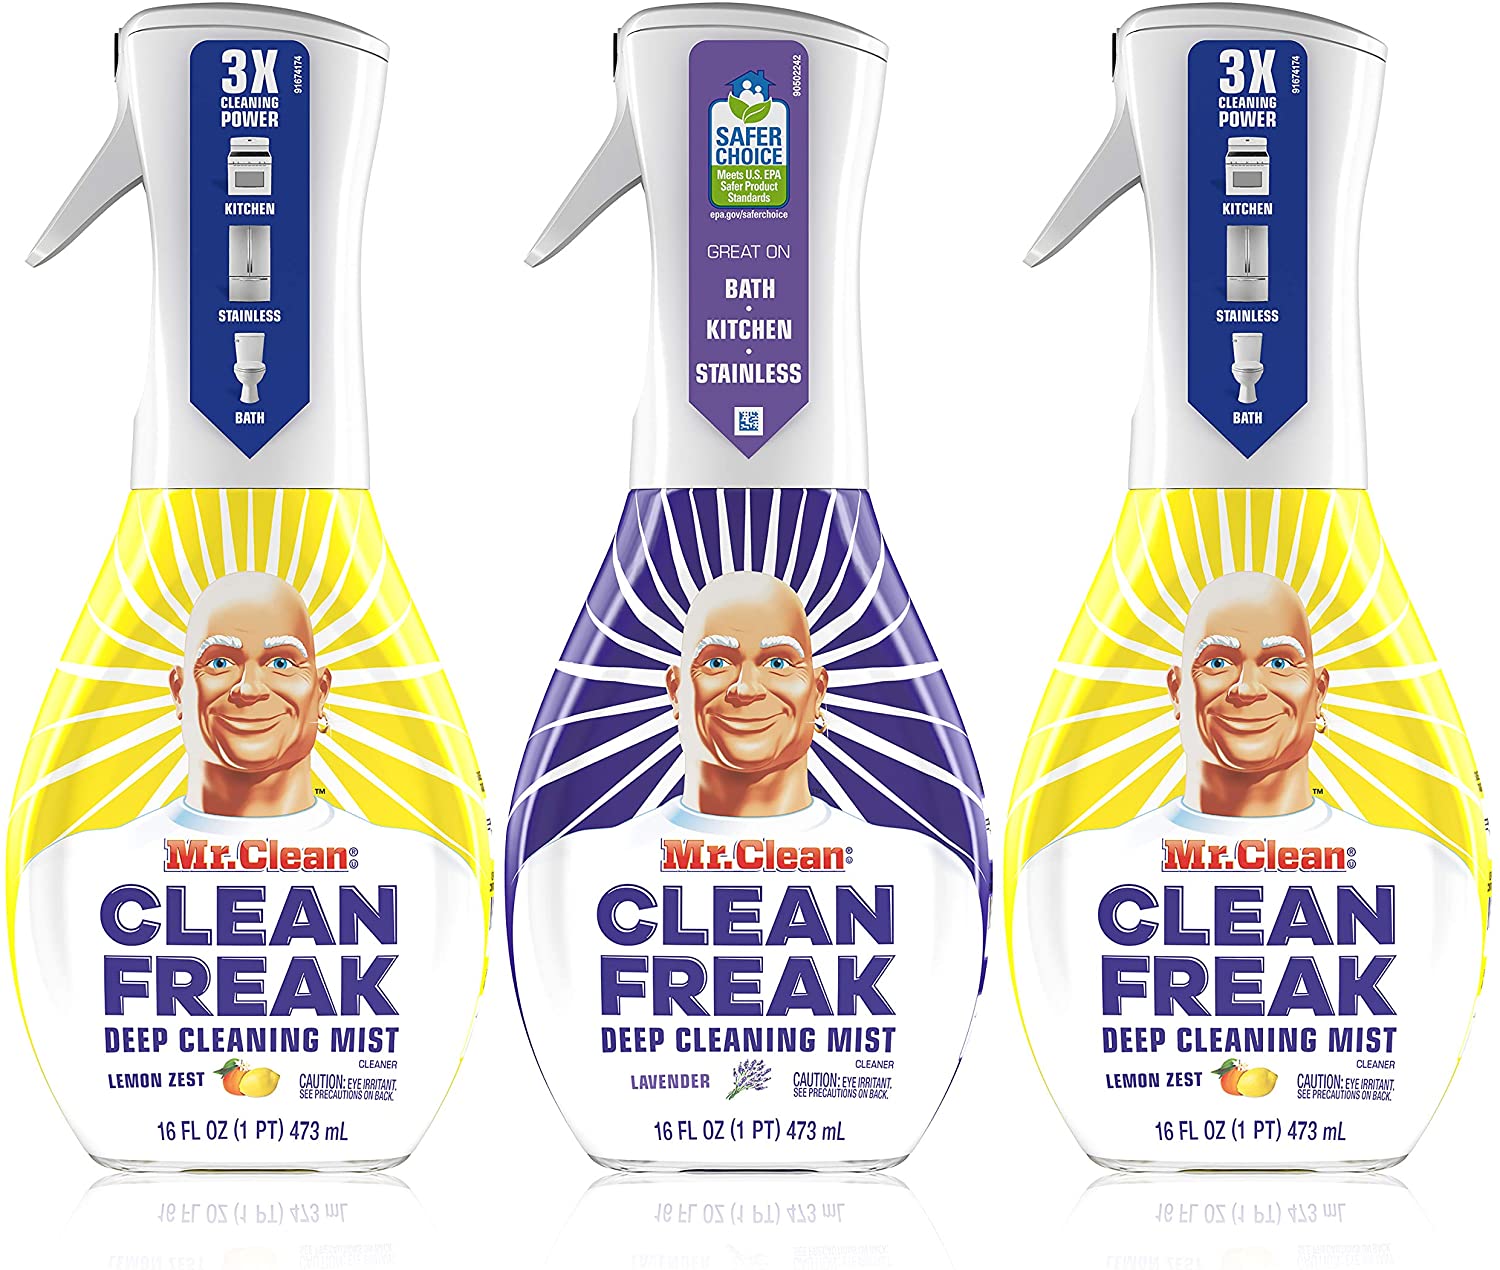 Mr. Clean Multi-Surface Clean Freak Mist Cleaning Product, 3-Pack